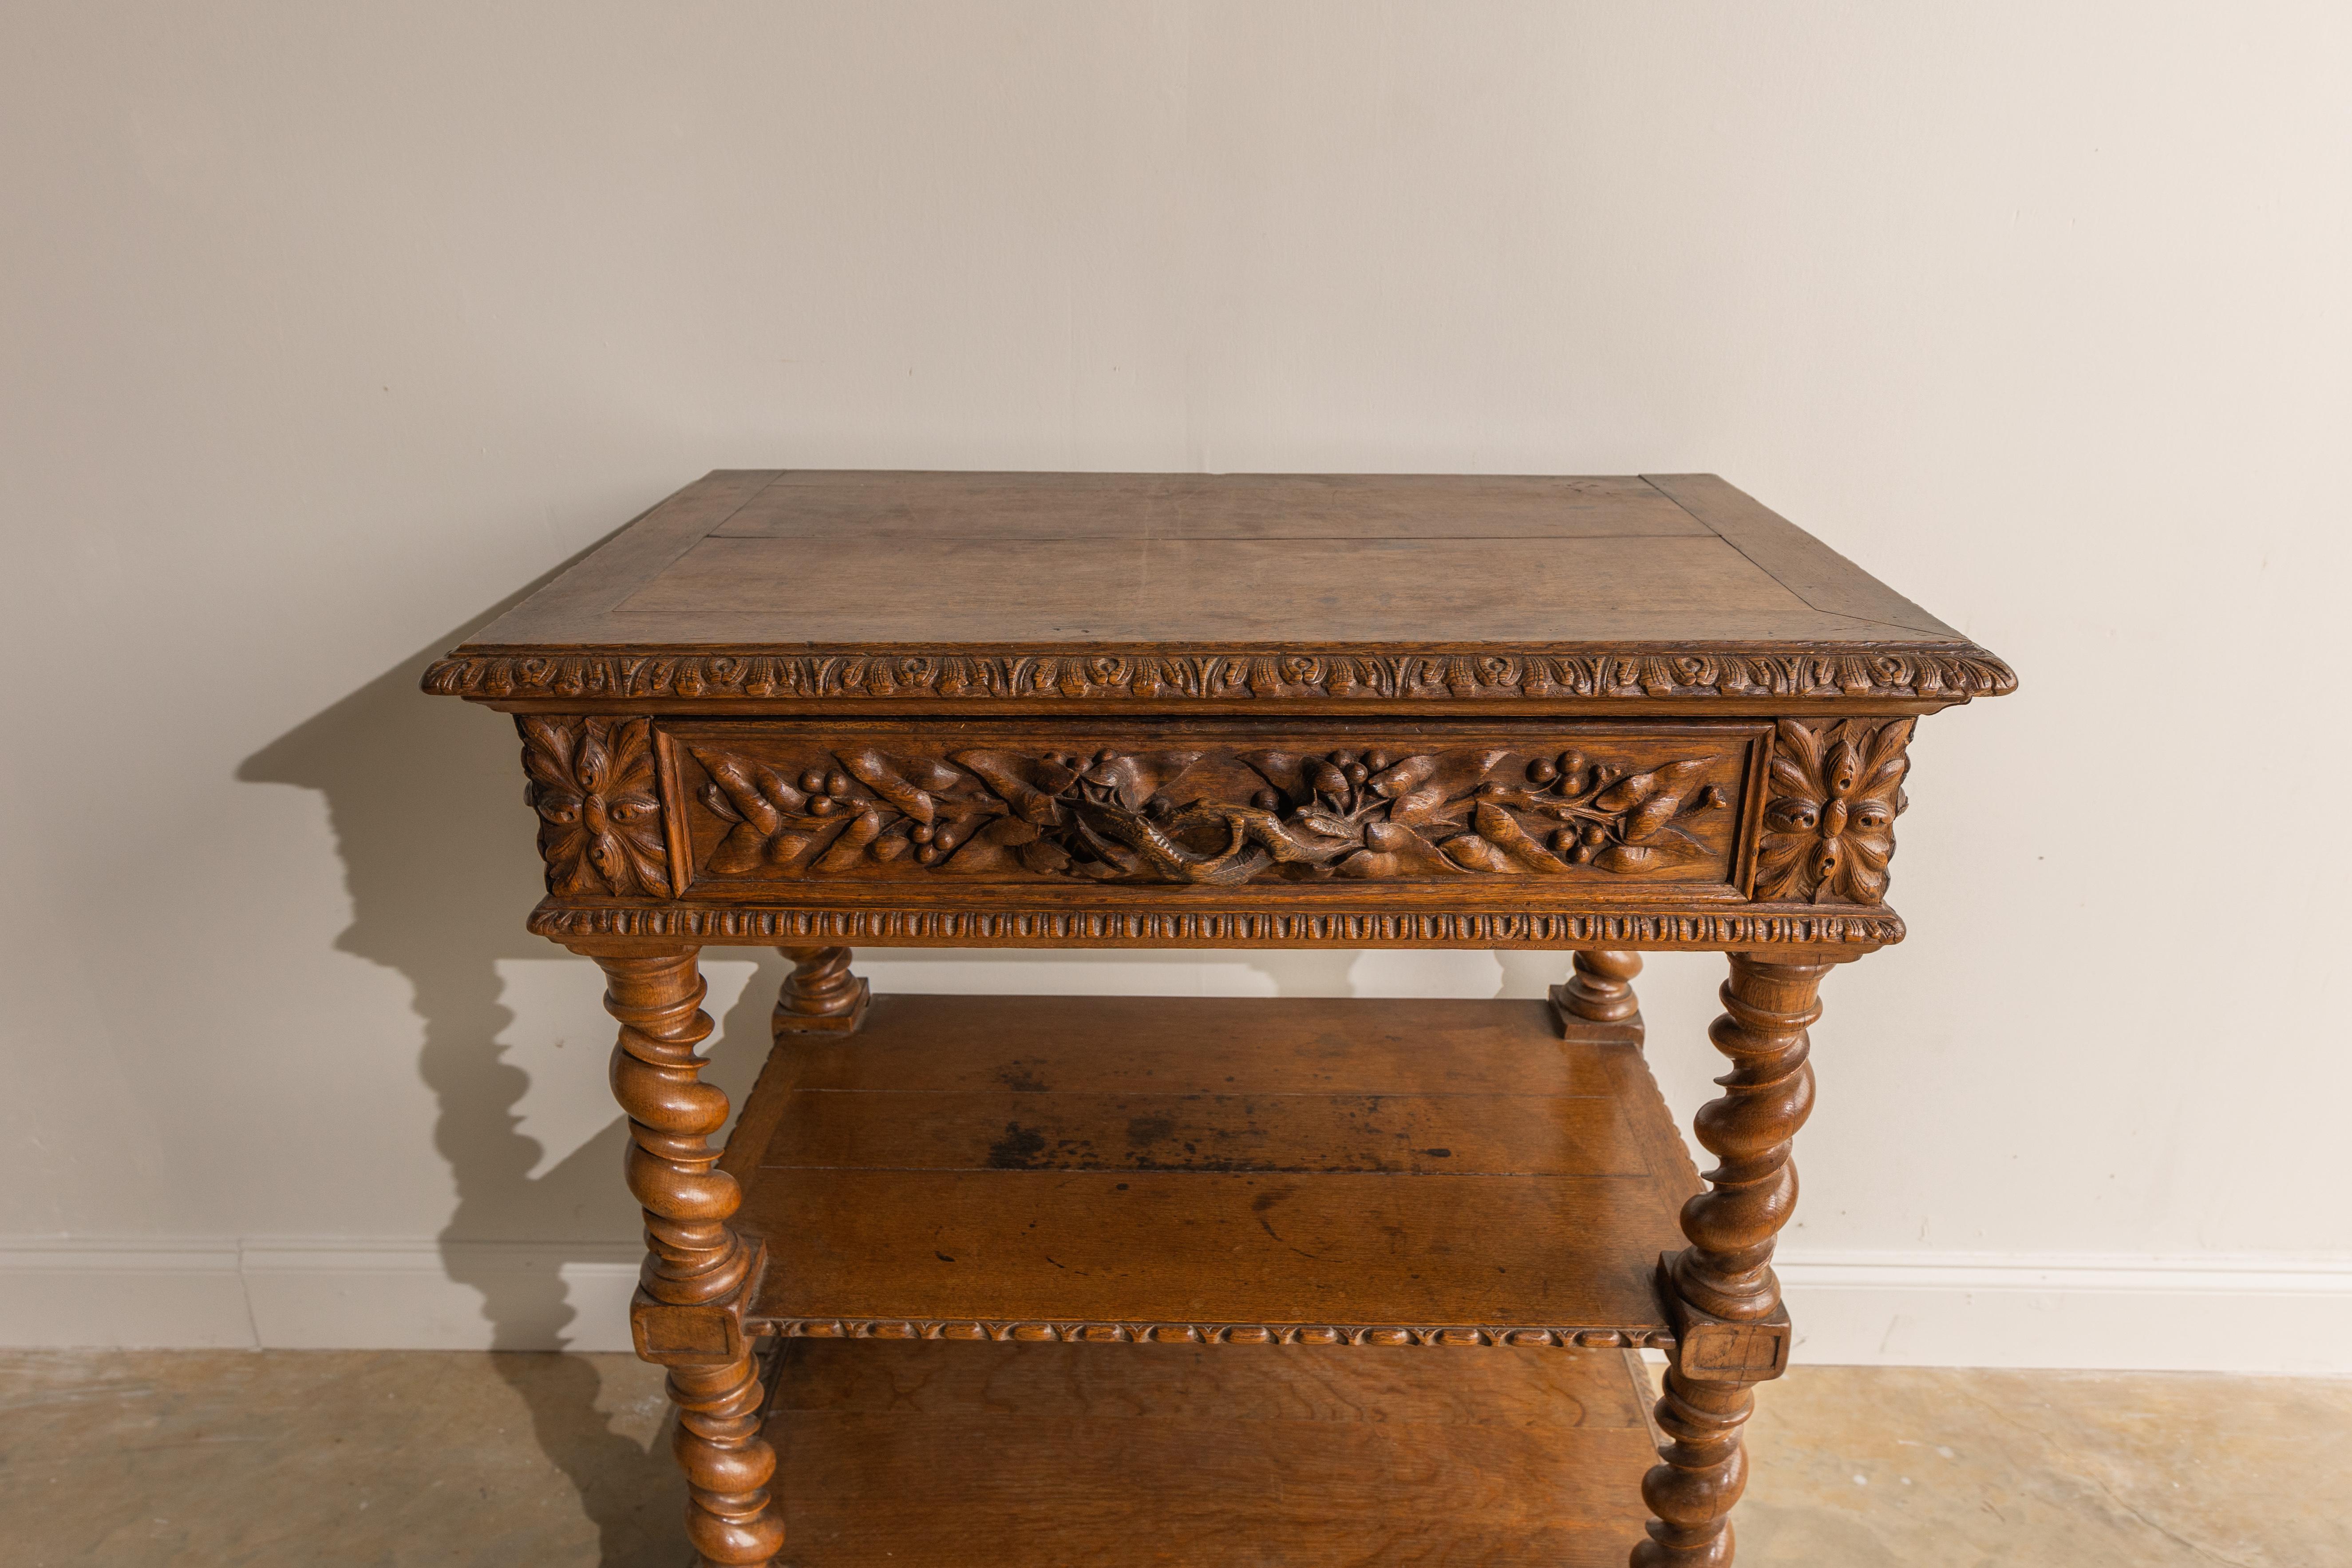 There are so many unique details to this Henri II Oak Console Table. The dark stain is truly stunning and gives this piece such a rich feel. There is a top central drawer with a very unique carved drawer pull. There are two sturdy shelves as well.